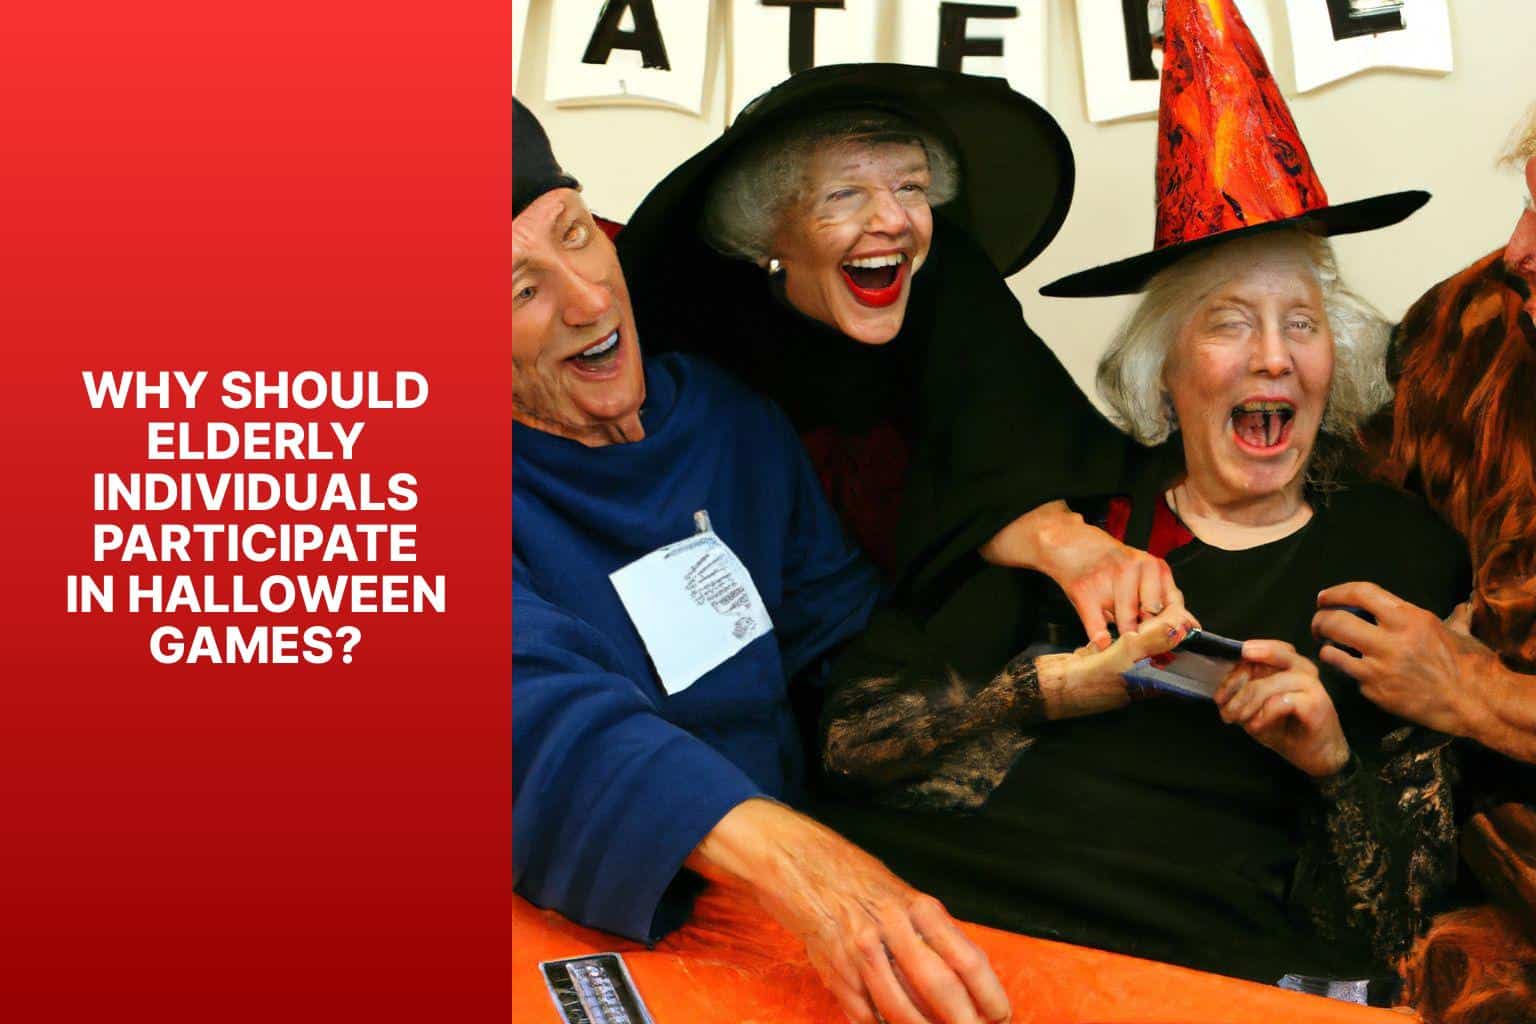 Why Should Elderly Individuals Participate in Halloween Games? - halloween games for elderly 